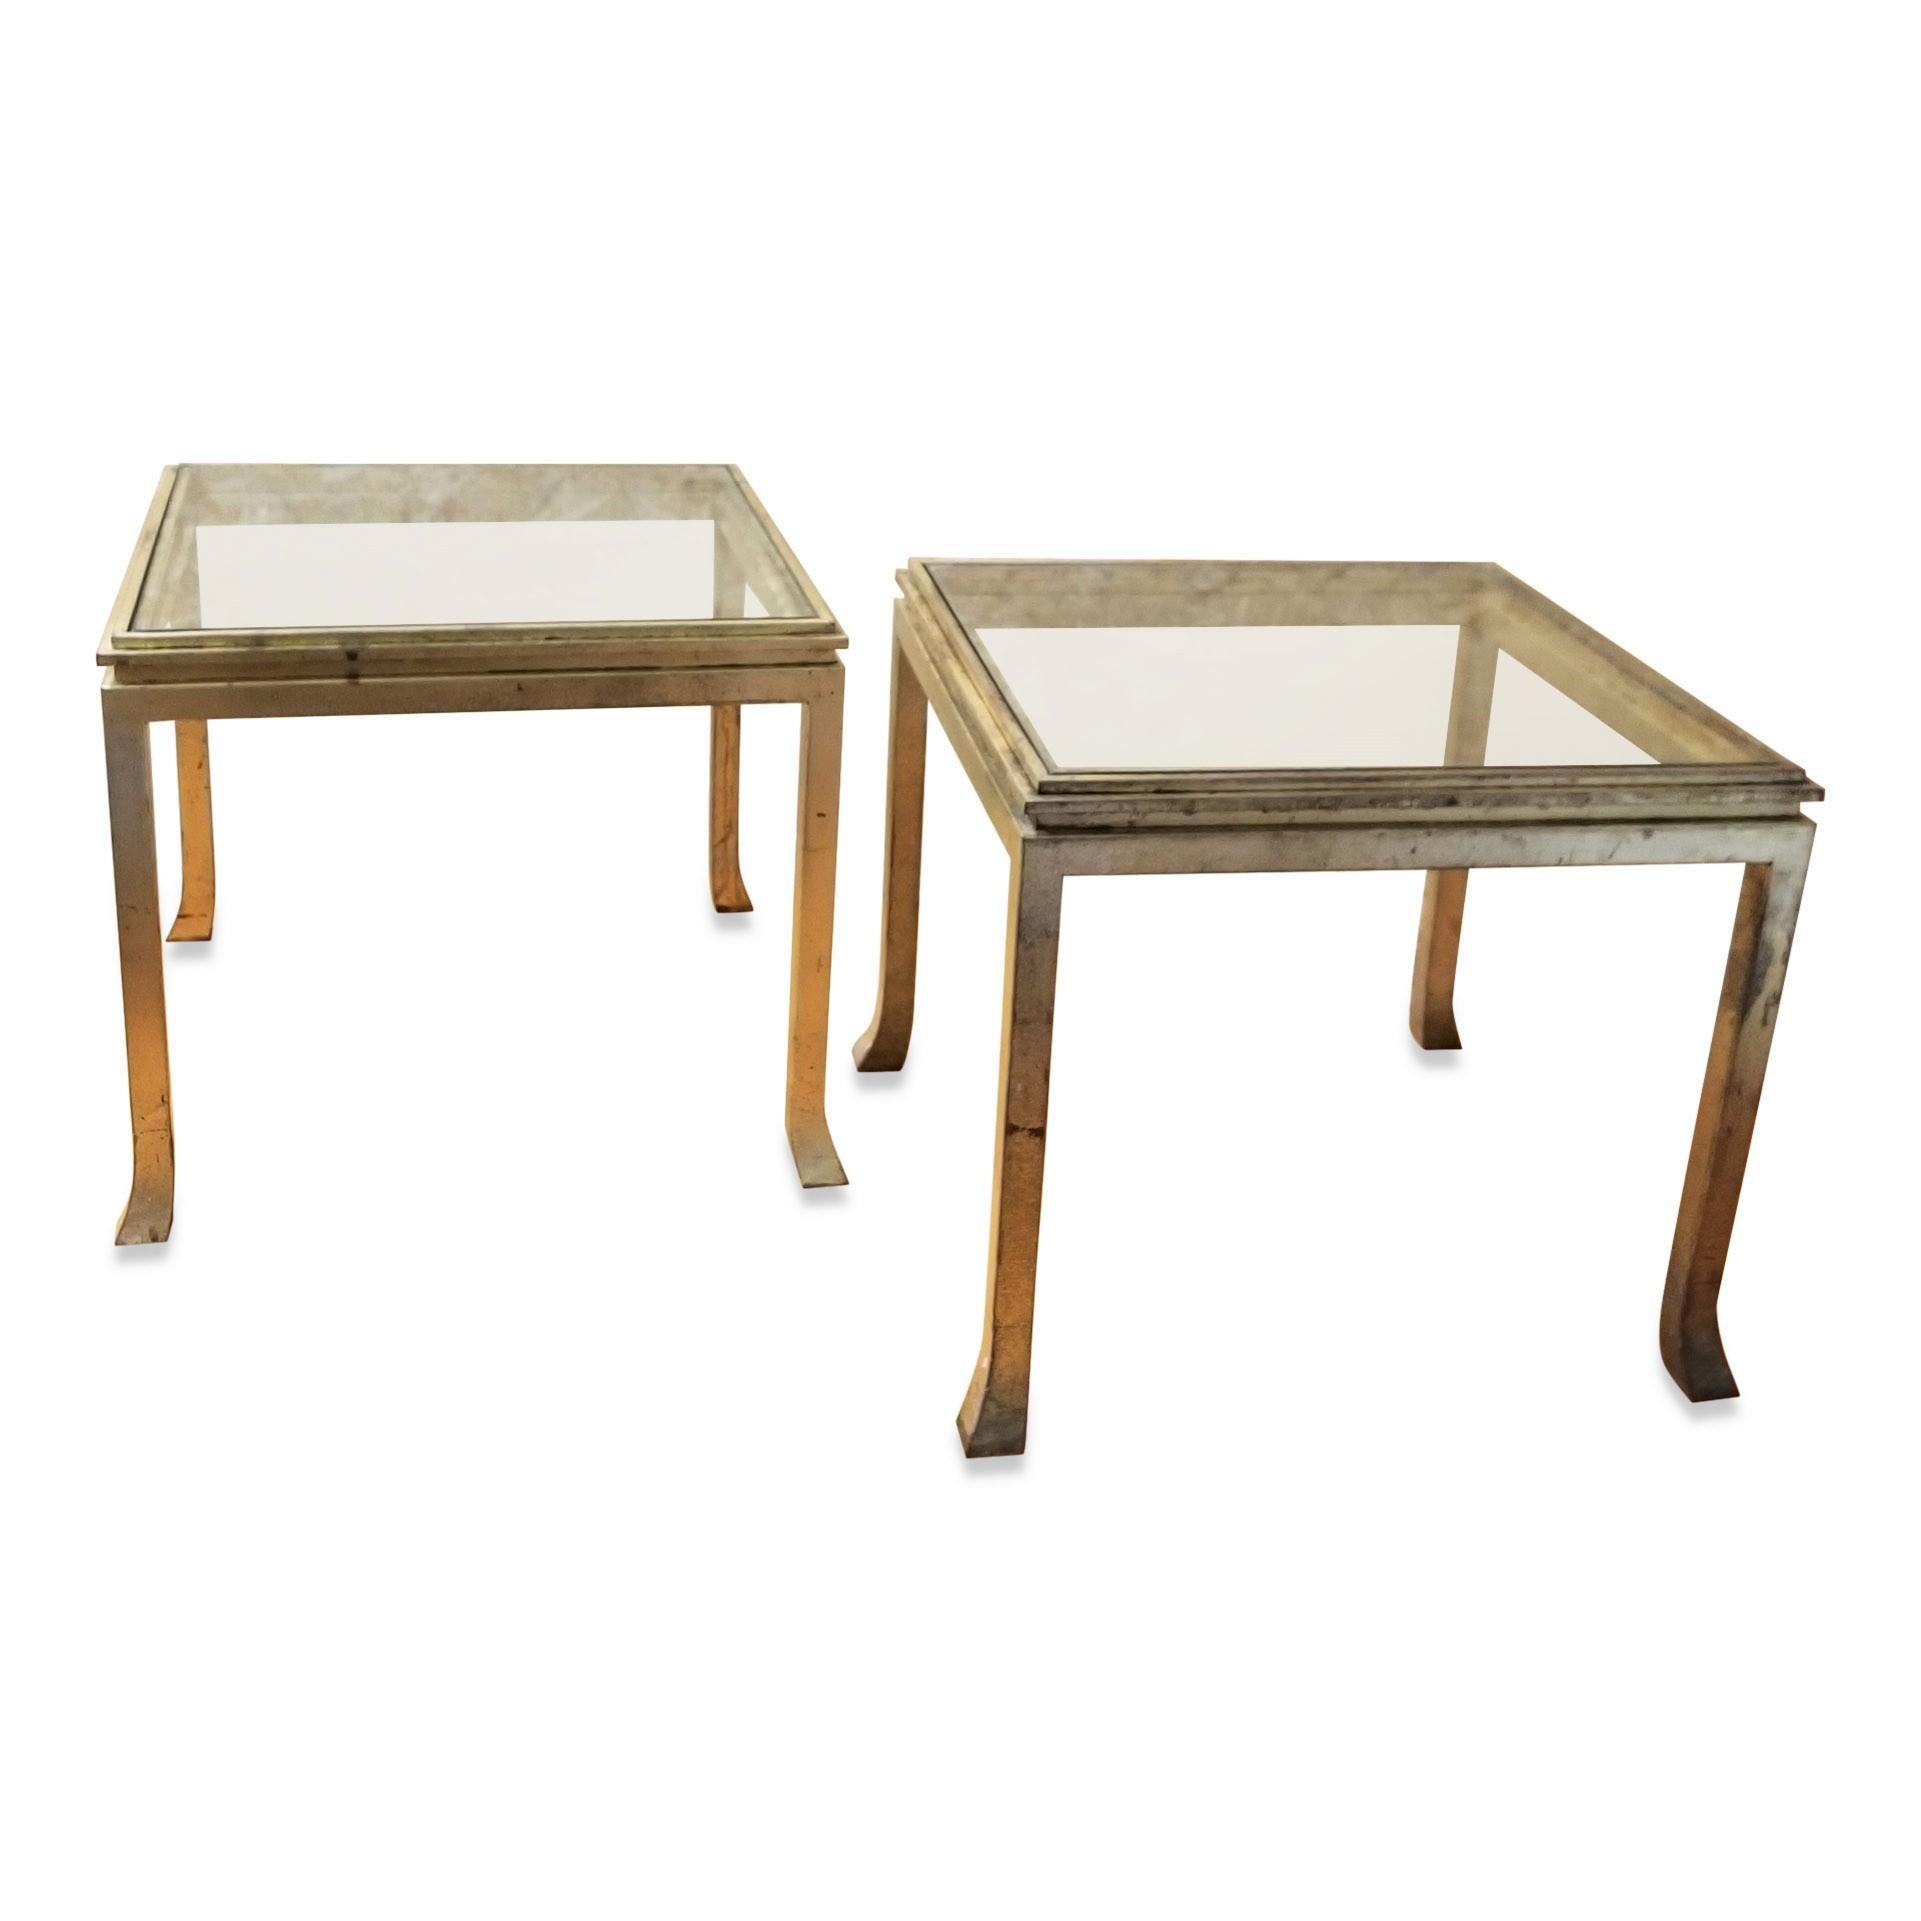 Late 20th Century Pair of Gold Leaf Solid Steel End Tables by Maison Ramsay, France, 1970s